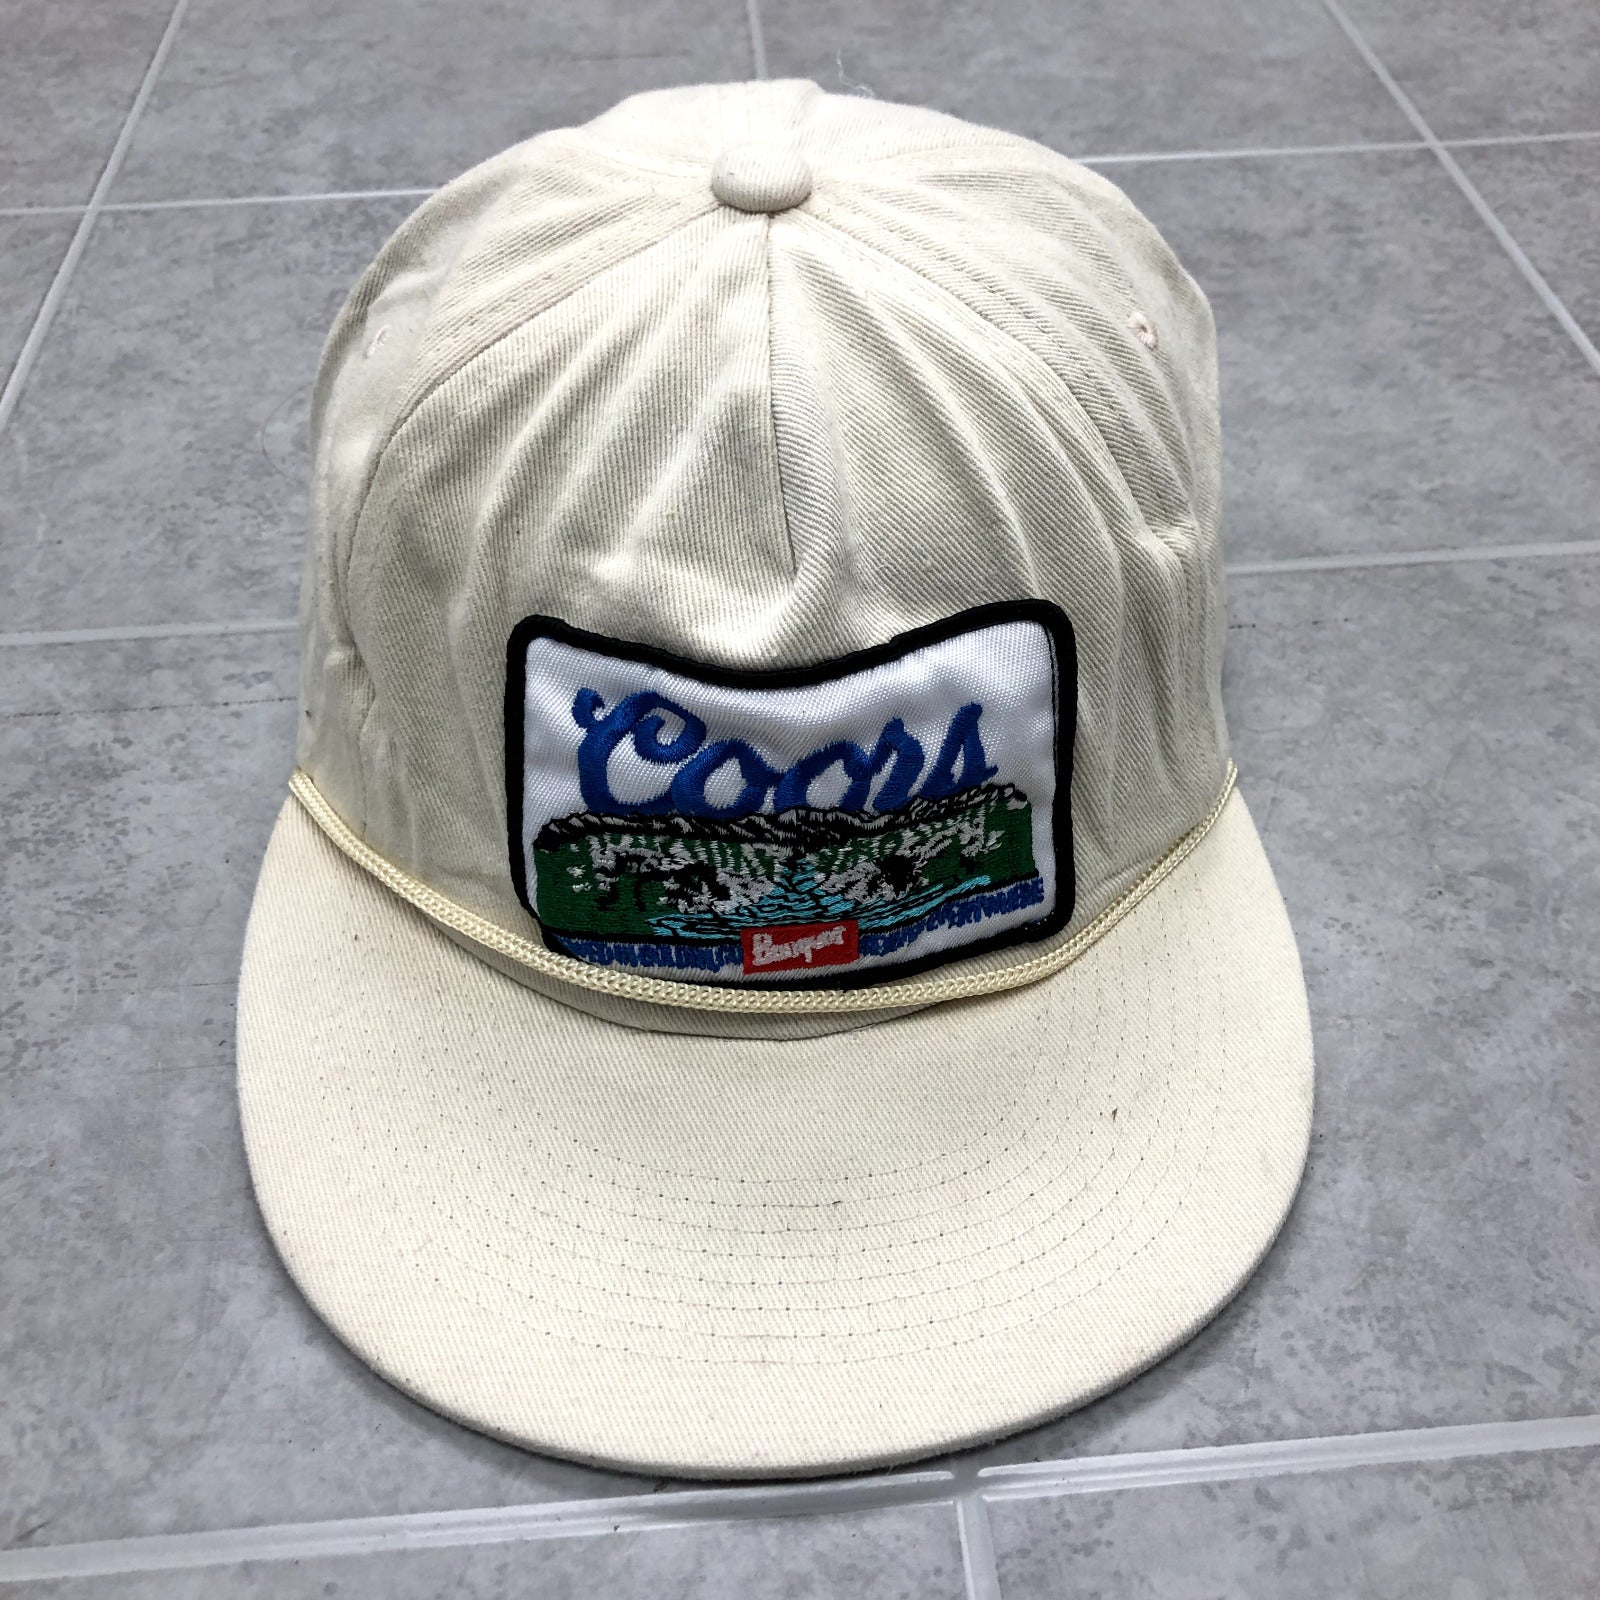 Vintage White Snap Back Graphic Tasseled COORS Baseball Cap Adult One Size